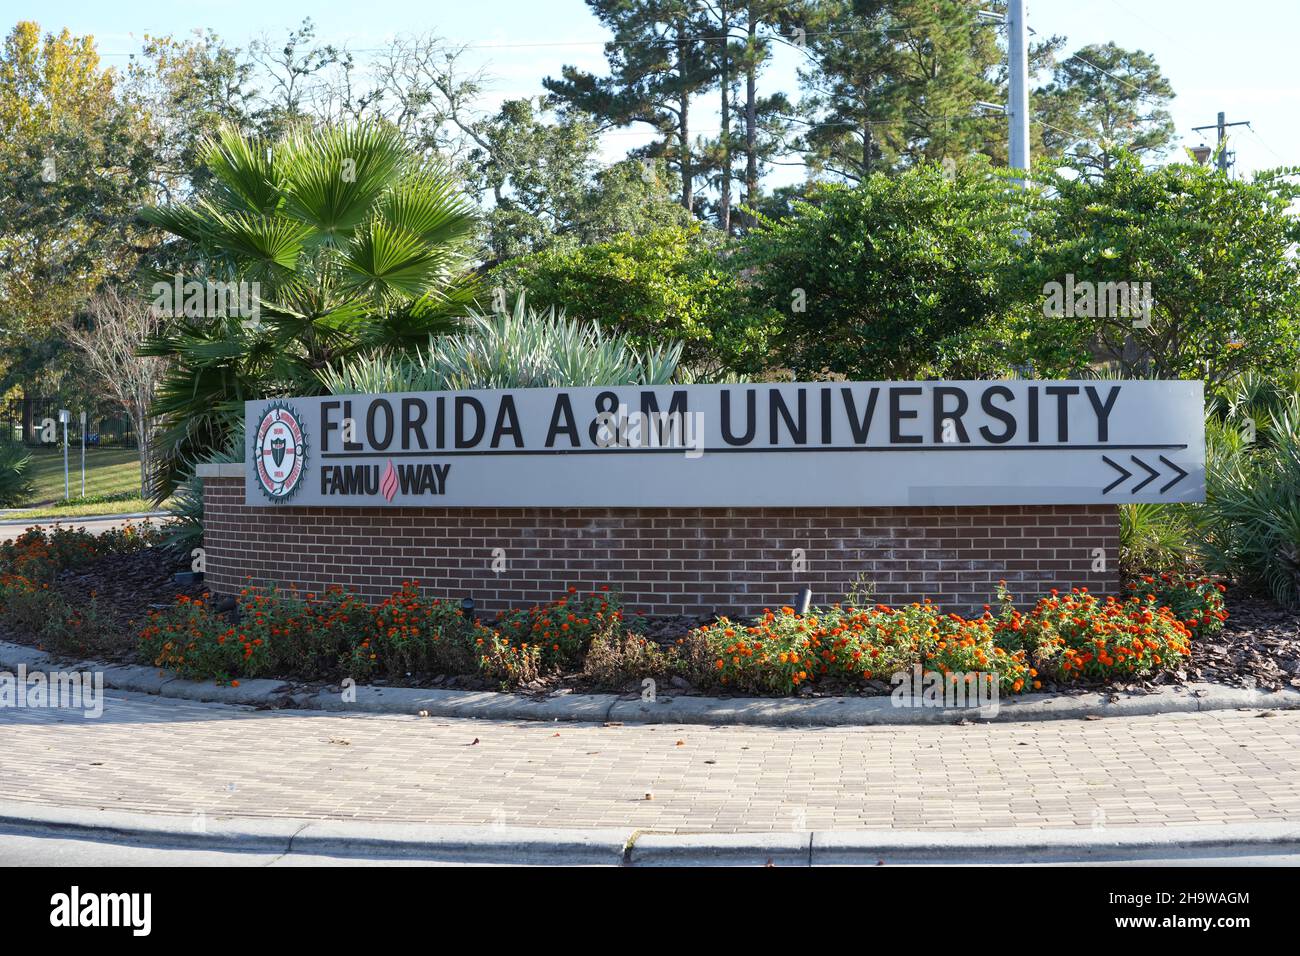 A sign at the entrance to the campus of Florida A&M University, Saturday, Nov. 20, 2021, in Tallahassee, Fla. Stock Photo